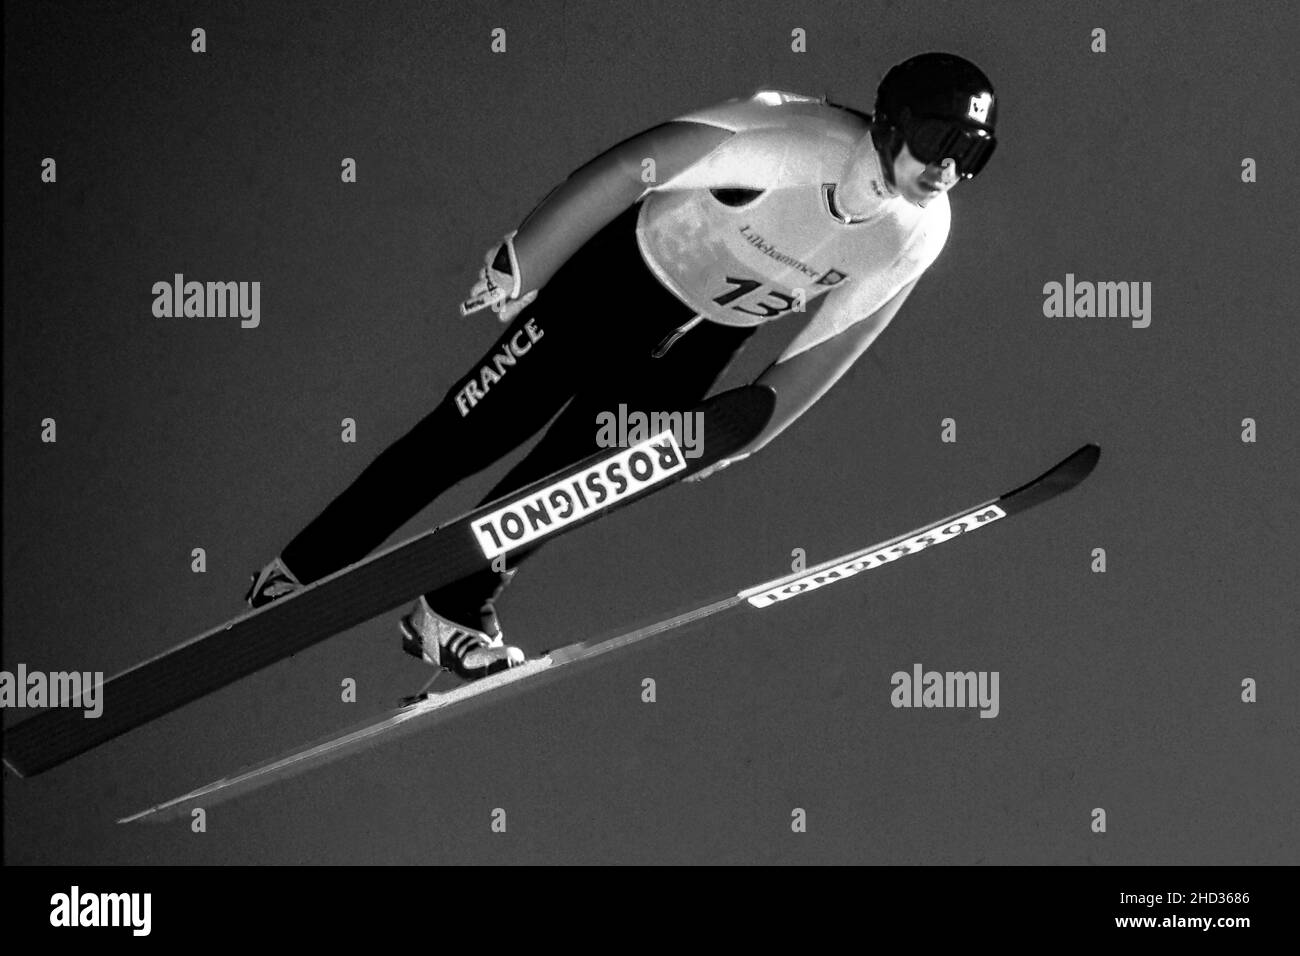 Nicolas Jean-Prost (FRA) competing in the Men's K120 individual ski jumping at the 1994 Olympic Winter Games Stock Photo